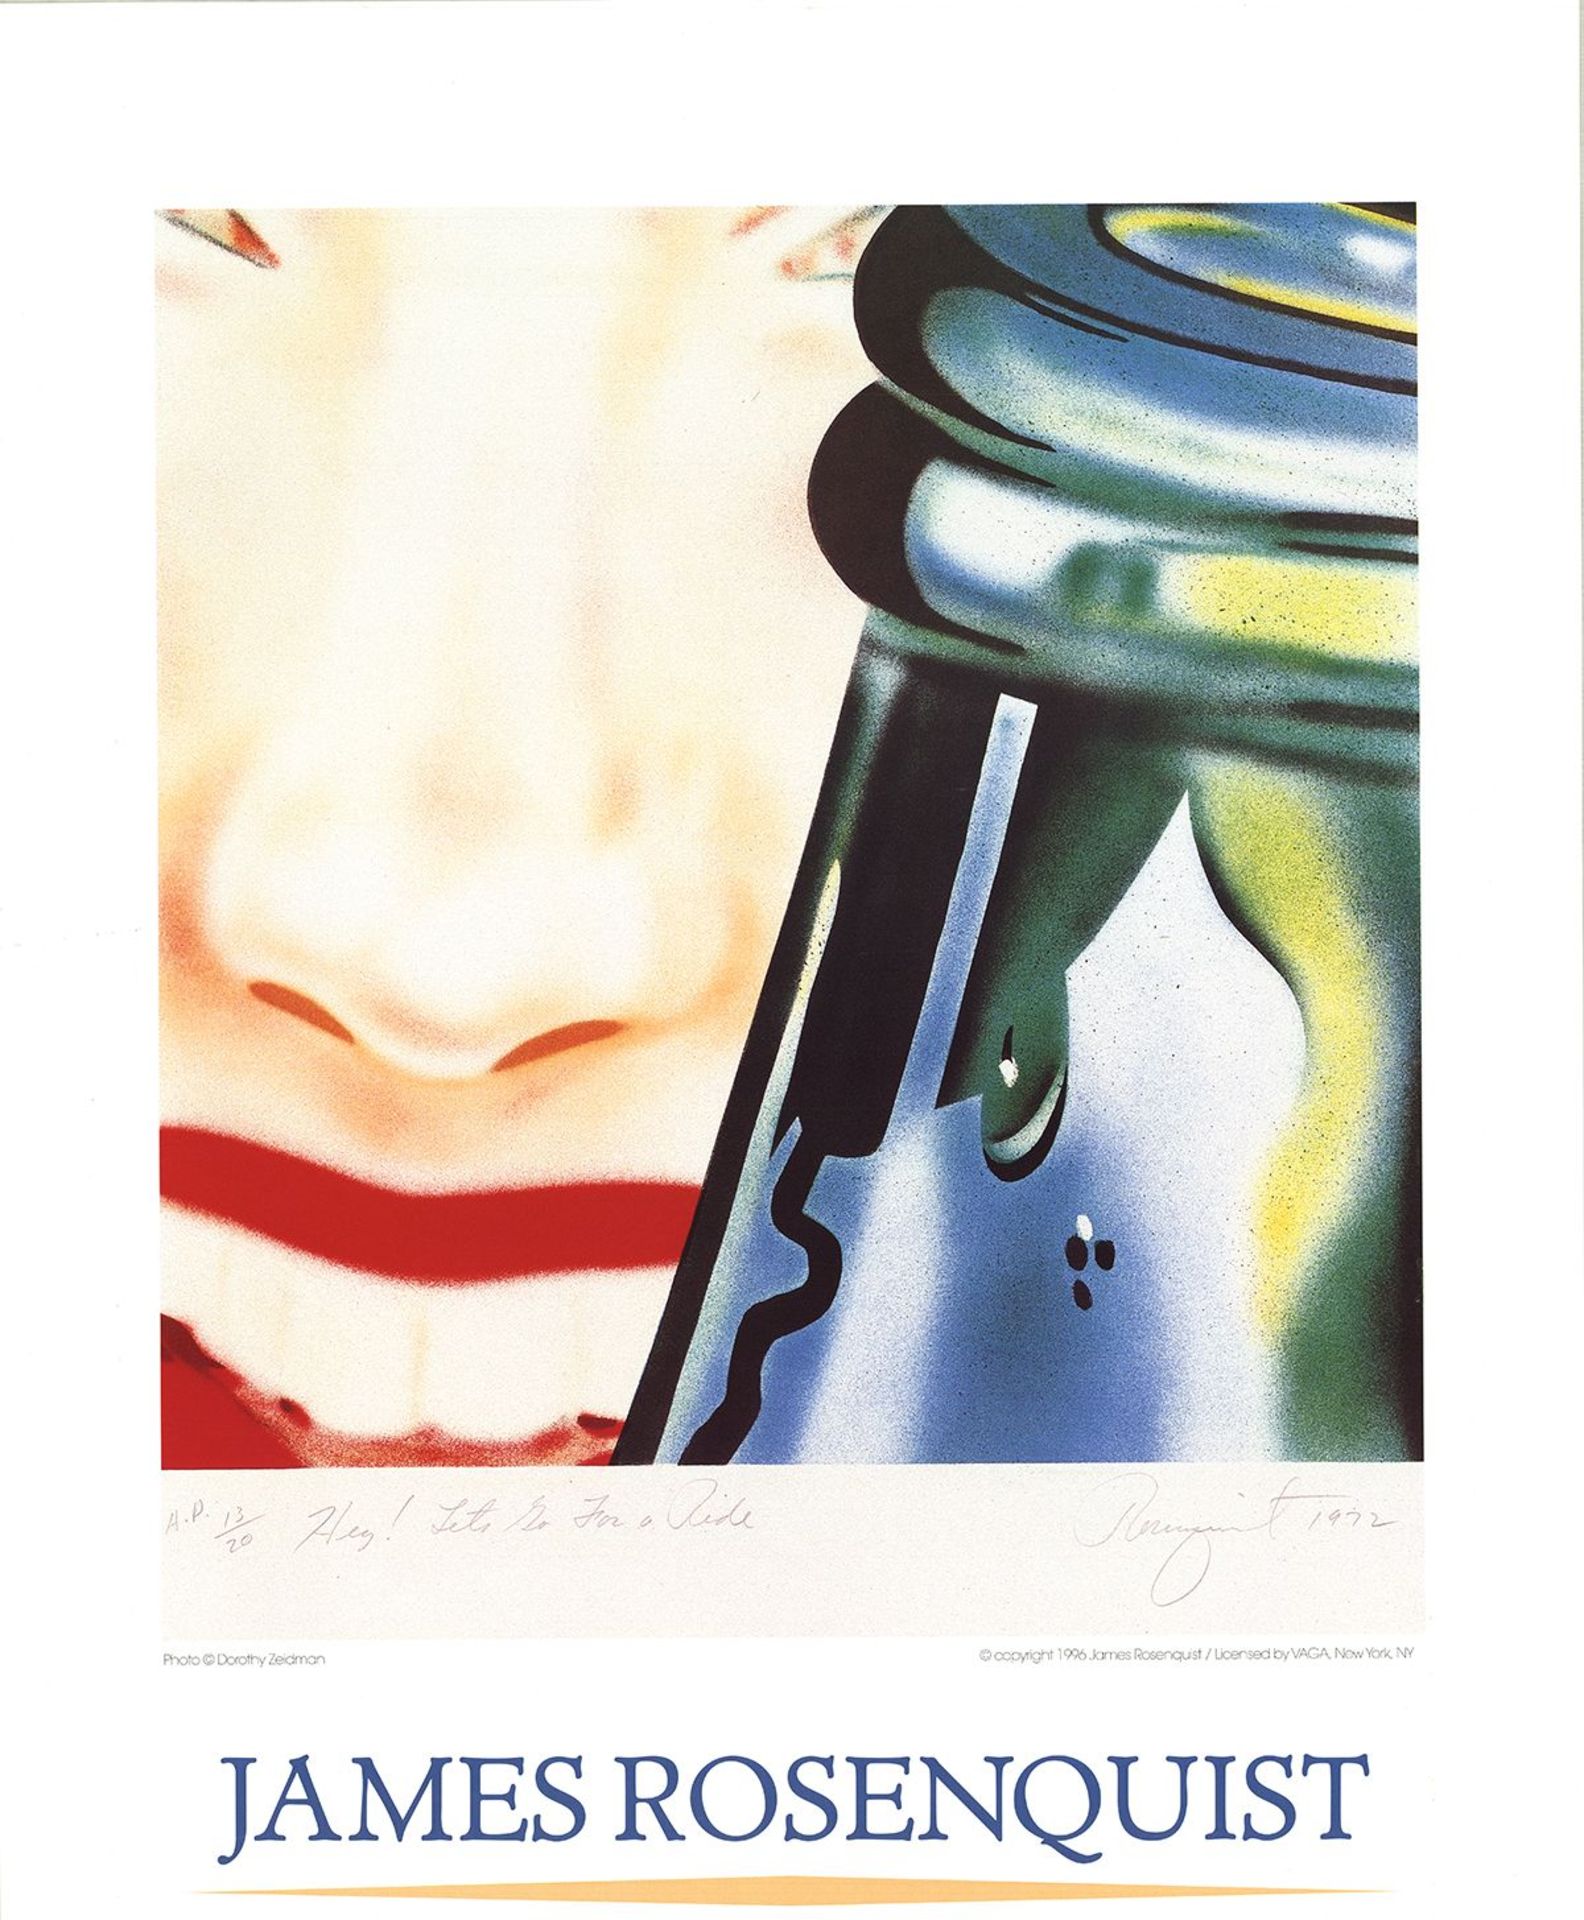 James Rosenquist - Hey, Let's Go For A Ride